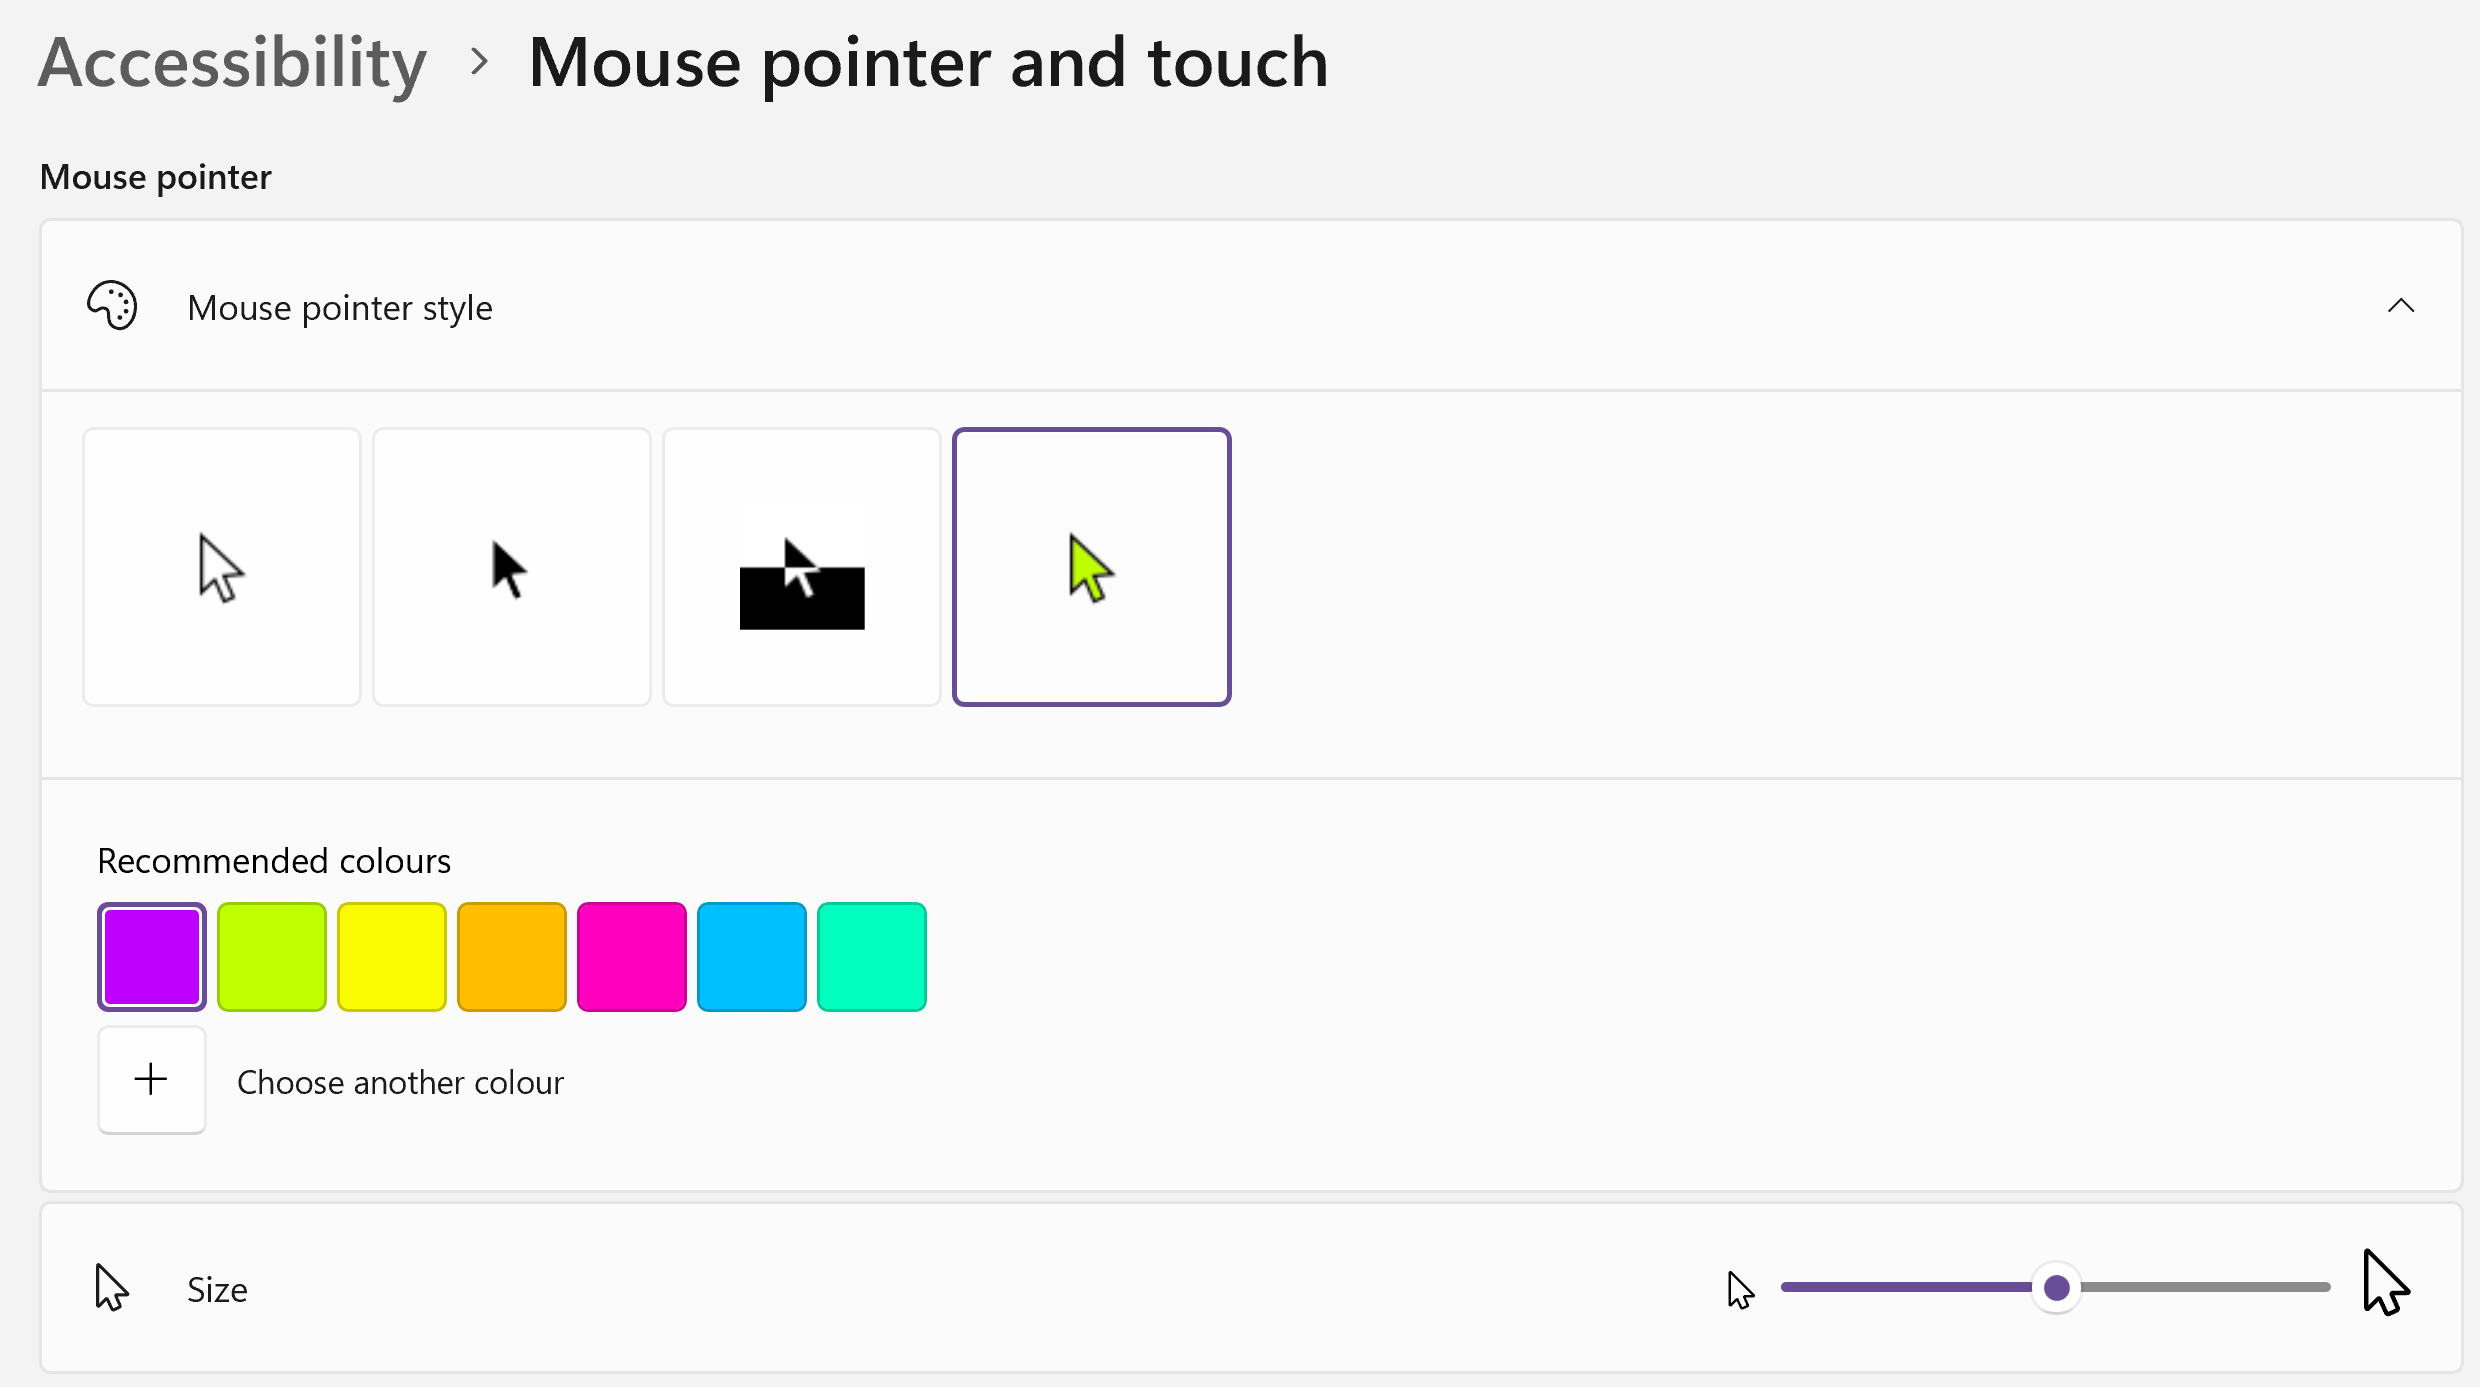 Mouse pointer set to size 8 and purple